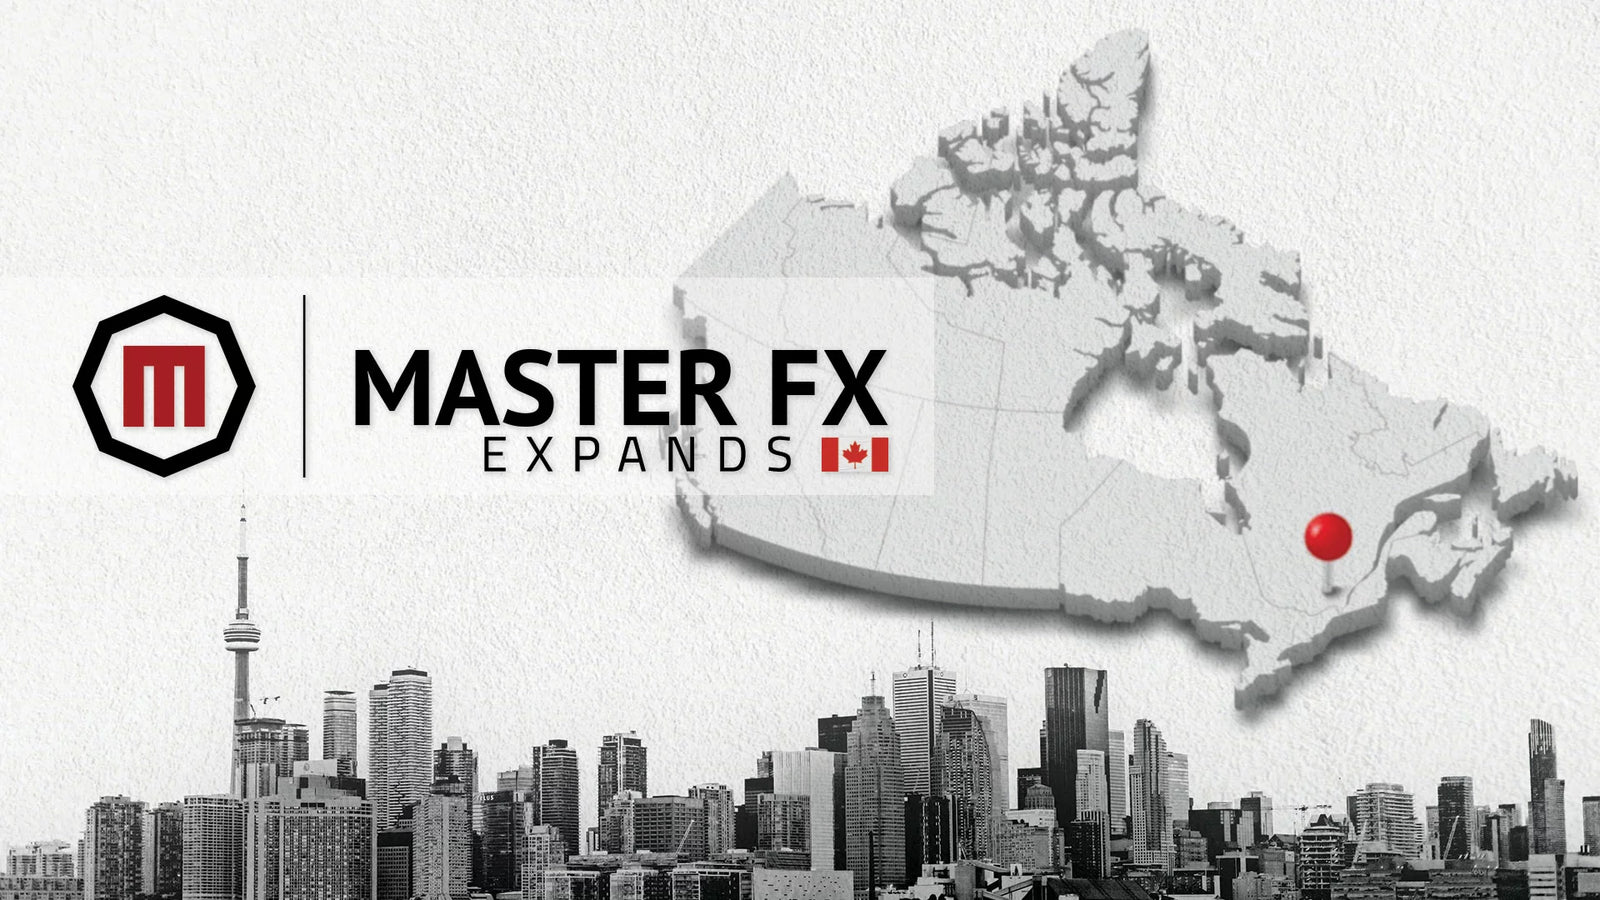 Master FX Expands